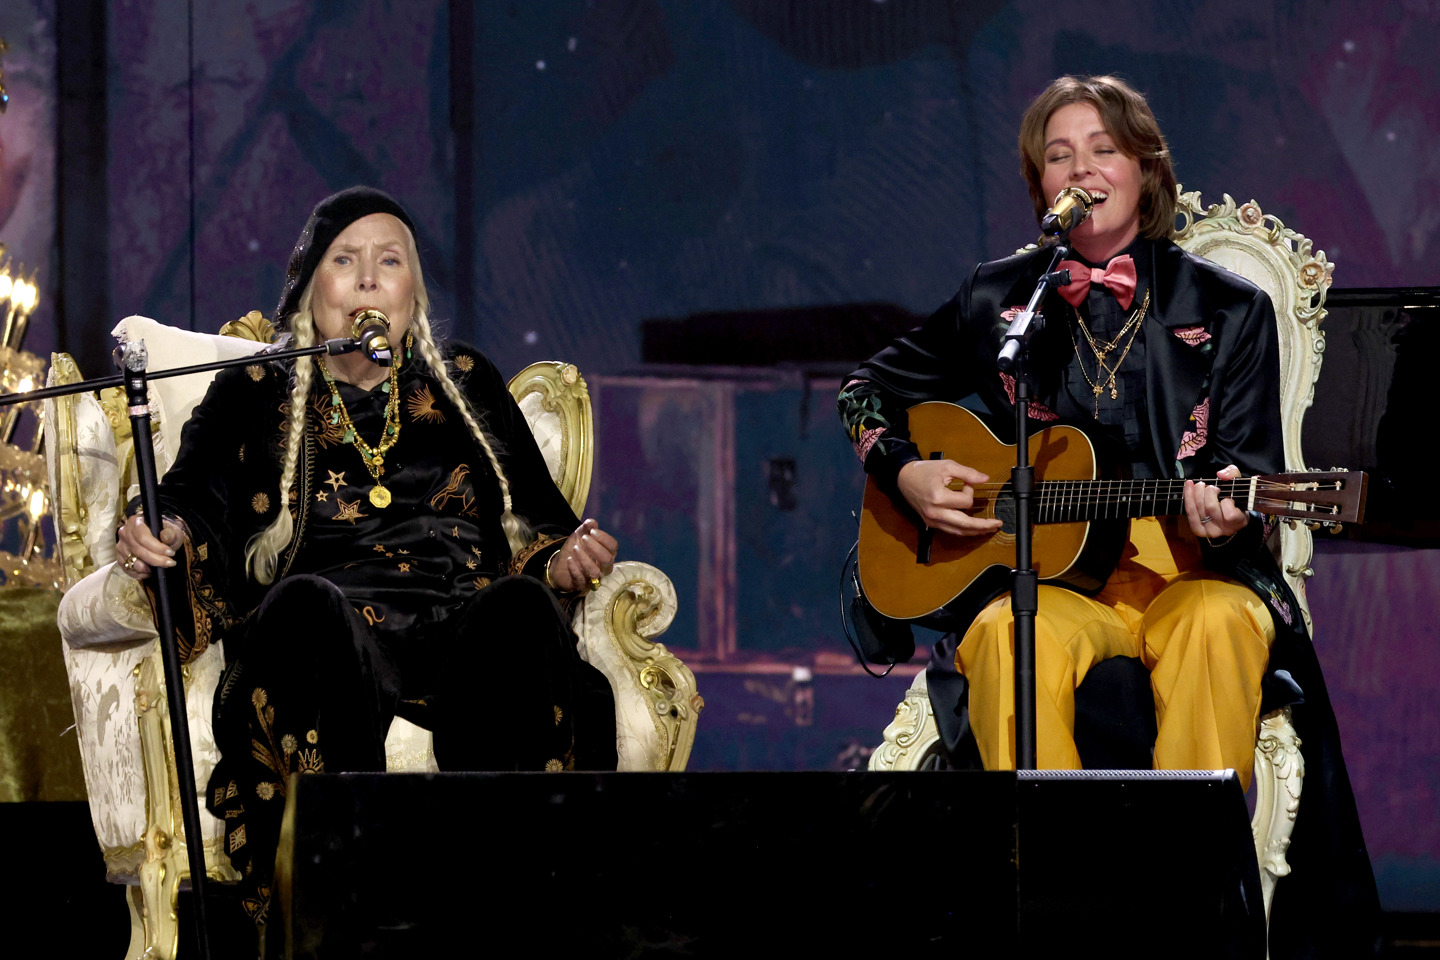 Joni Mitchell and Brandi Carlile deliver historic performance at 66th Grammy Awards, using Neumann KK 205 microphone capsules and a Sennheiser Digital 6000 system 